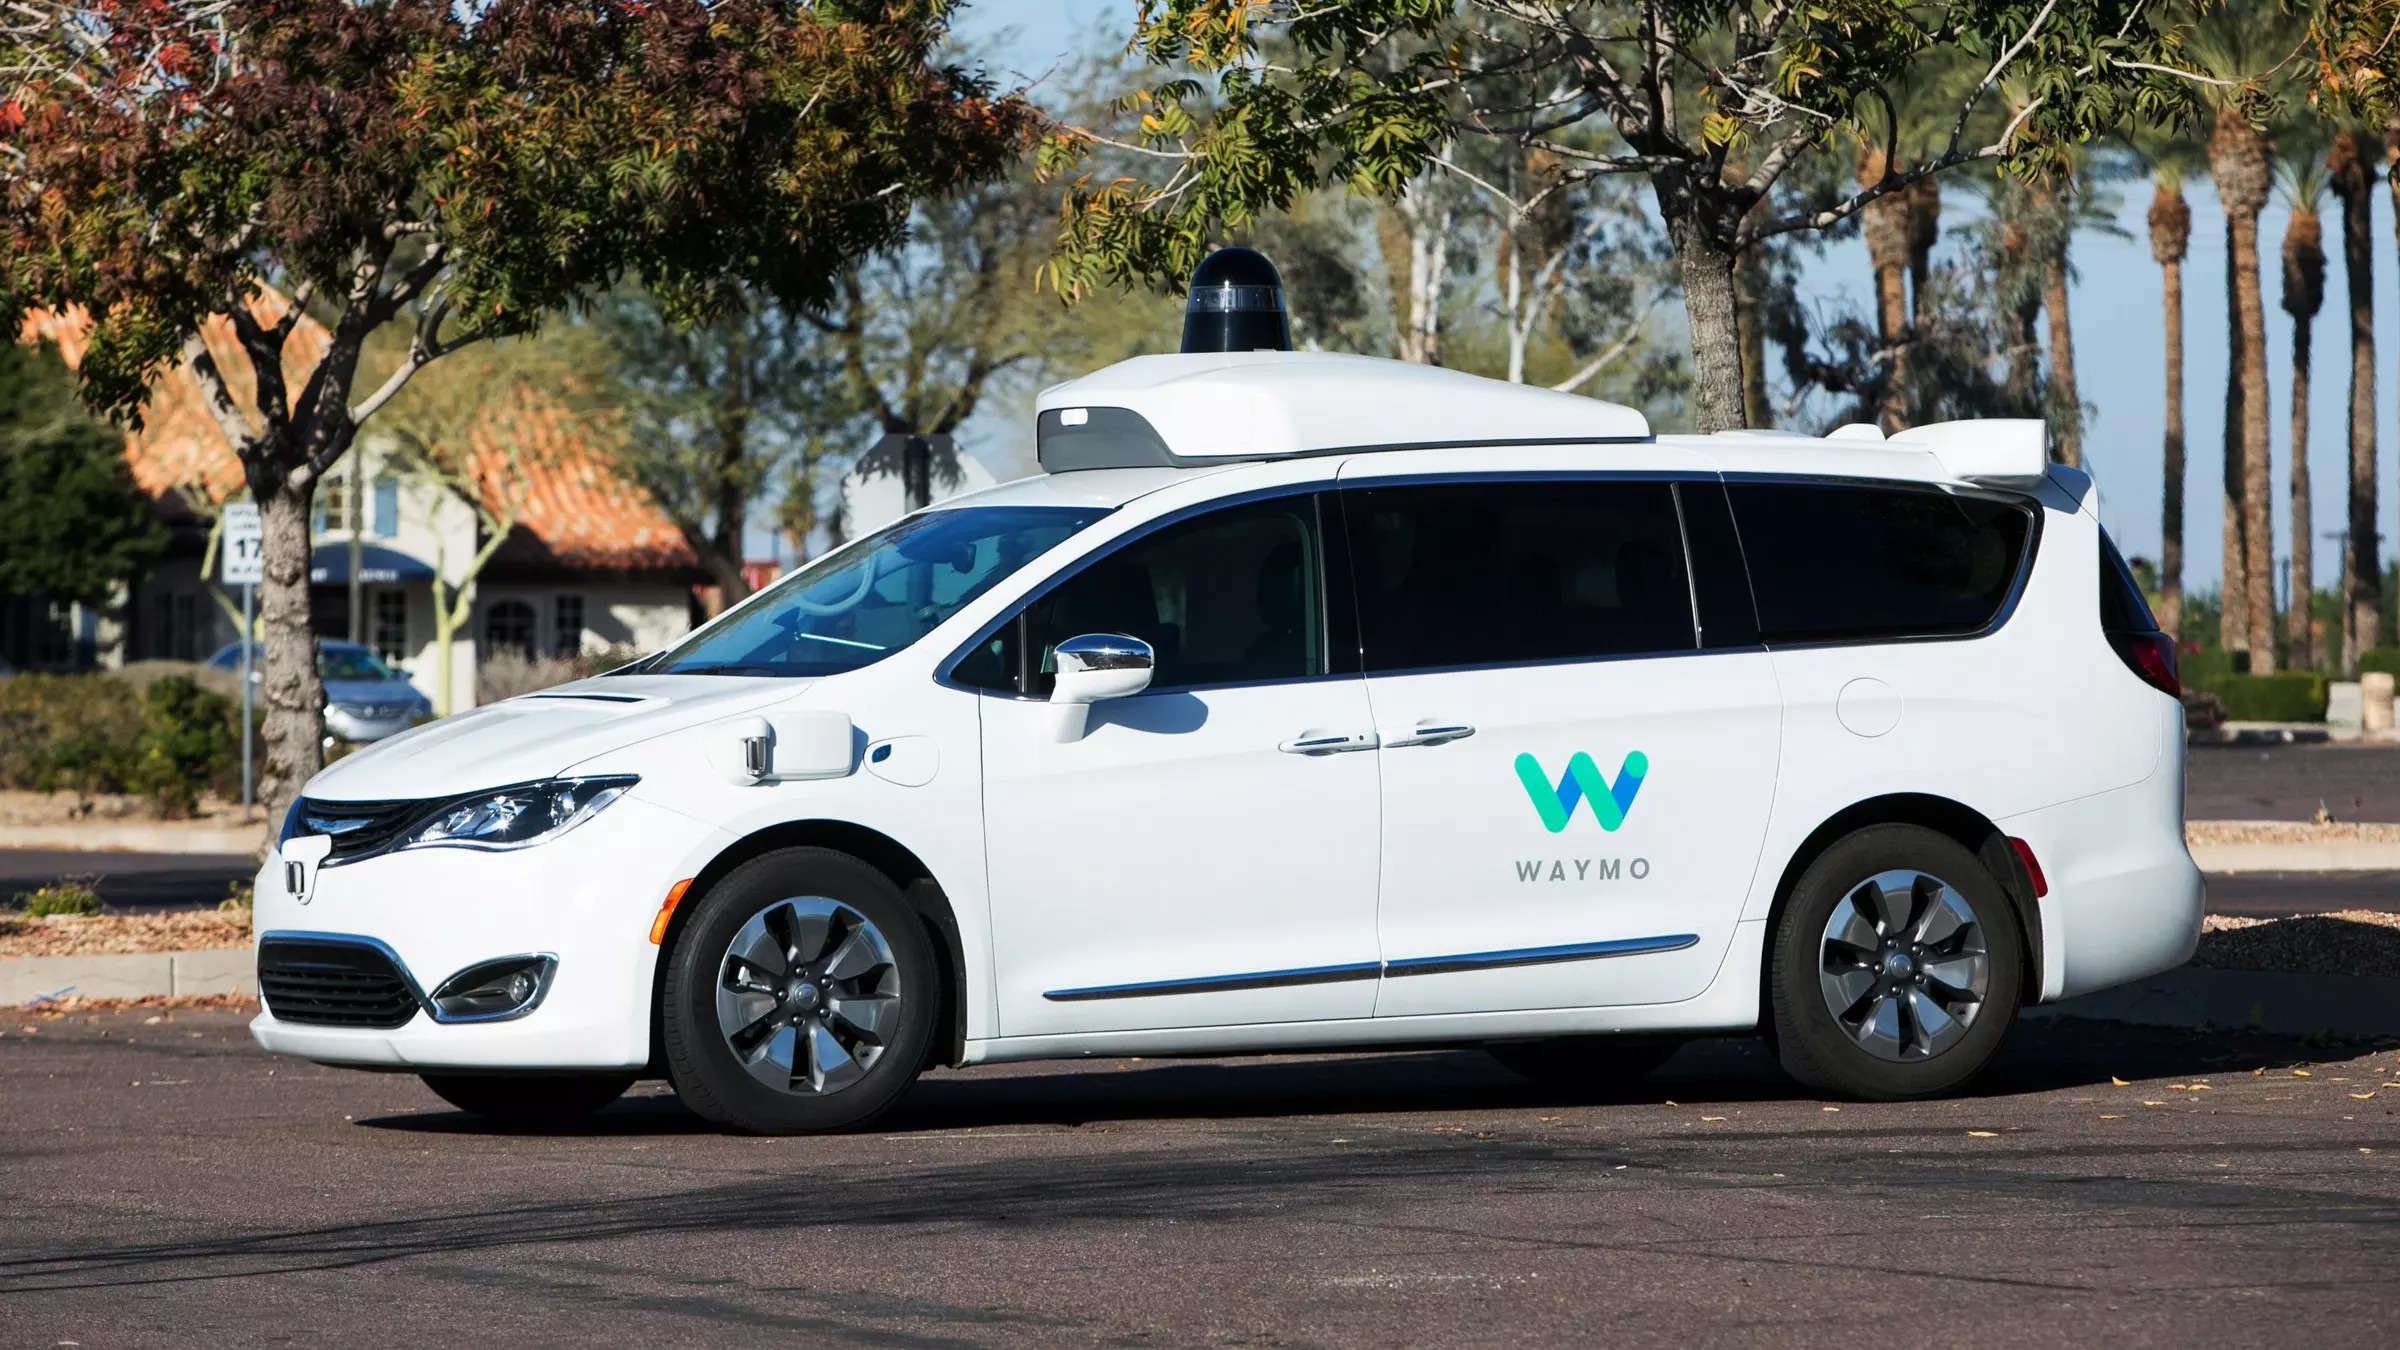 Waymo in August started giving autonomous rides, which are free of charge, to a limited number of people in San Francisco with safety drivers using its Jaguar electric vehicles.